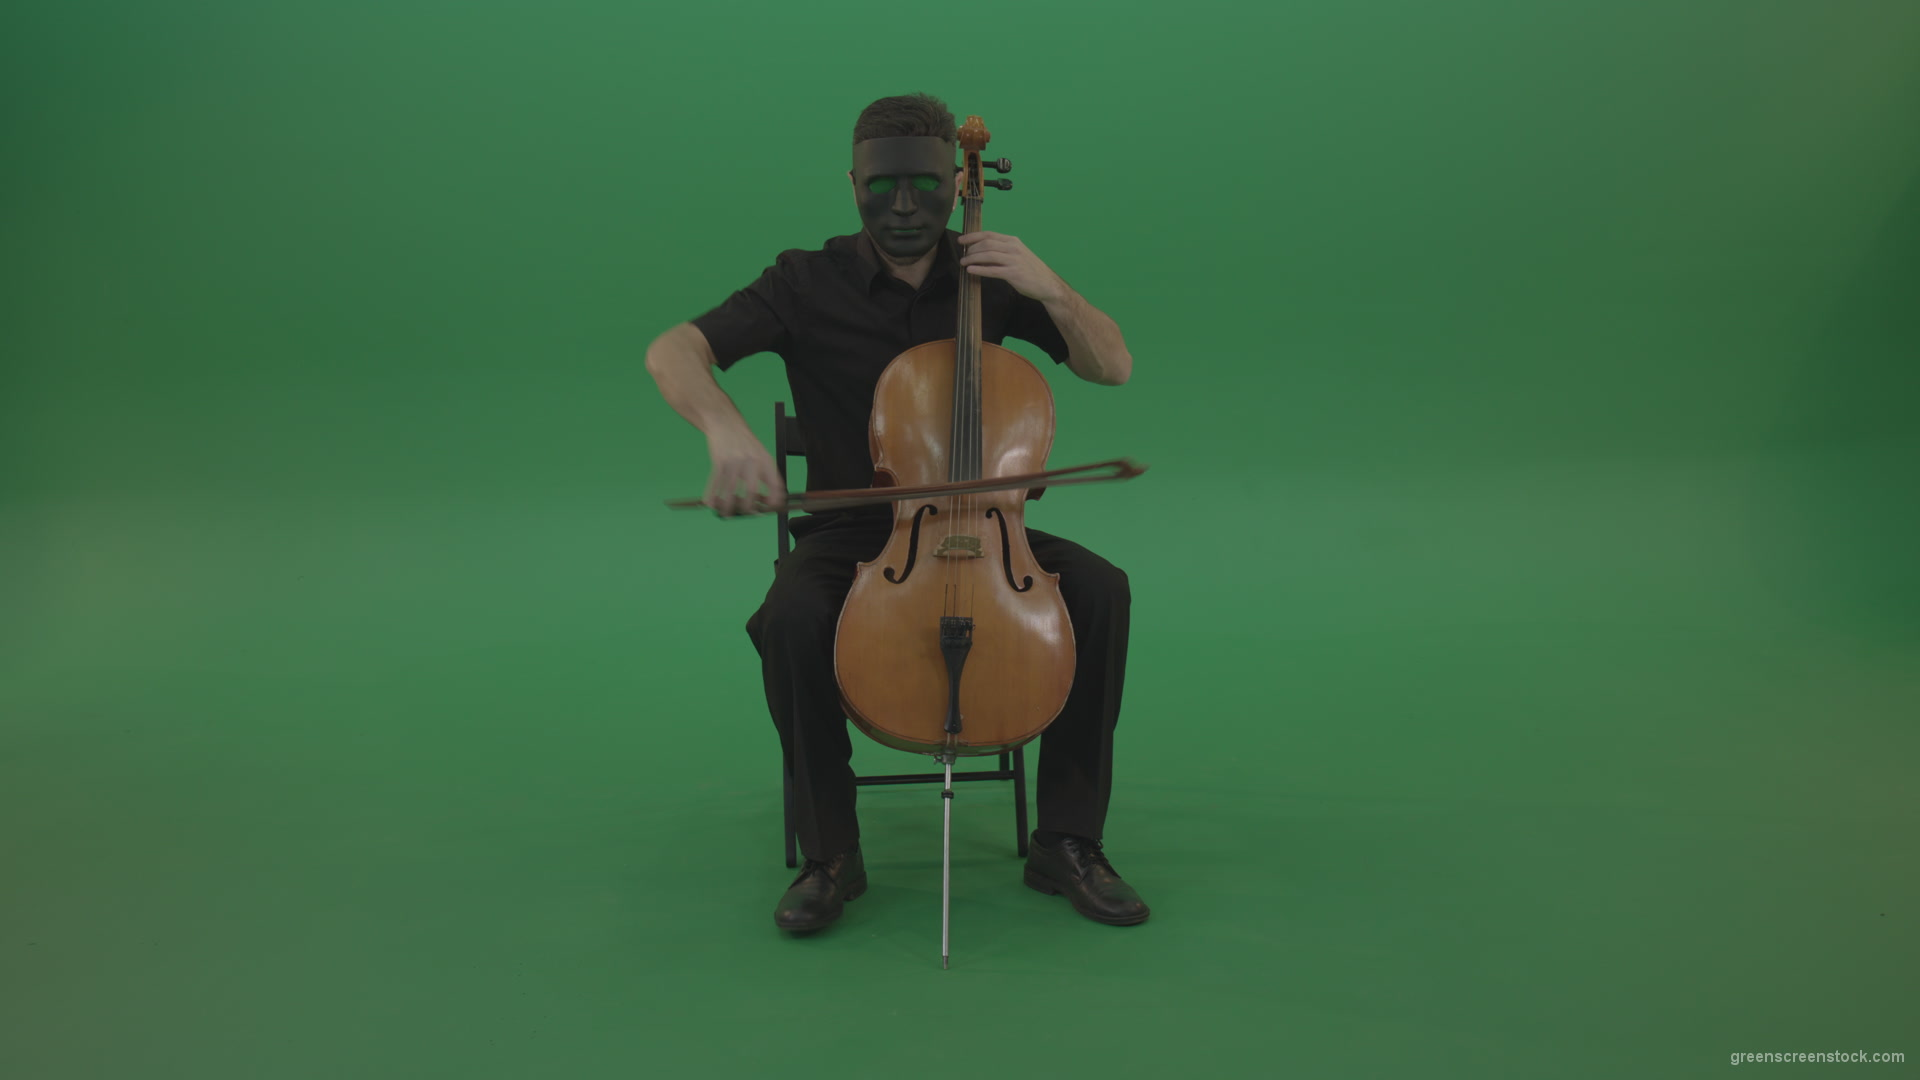 vj video background Full-size-man-in-black-wear-and-mask-play-violoncello-cello-strings-music-instrument-isolated-on-green-screen_003